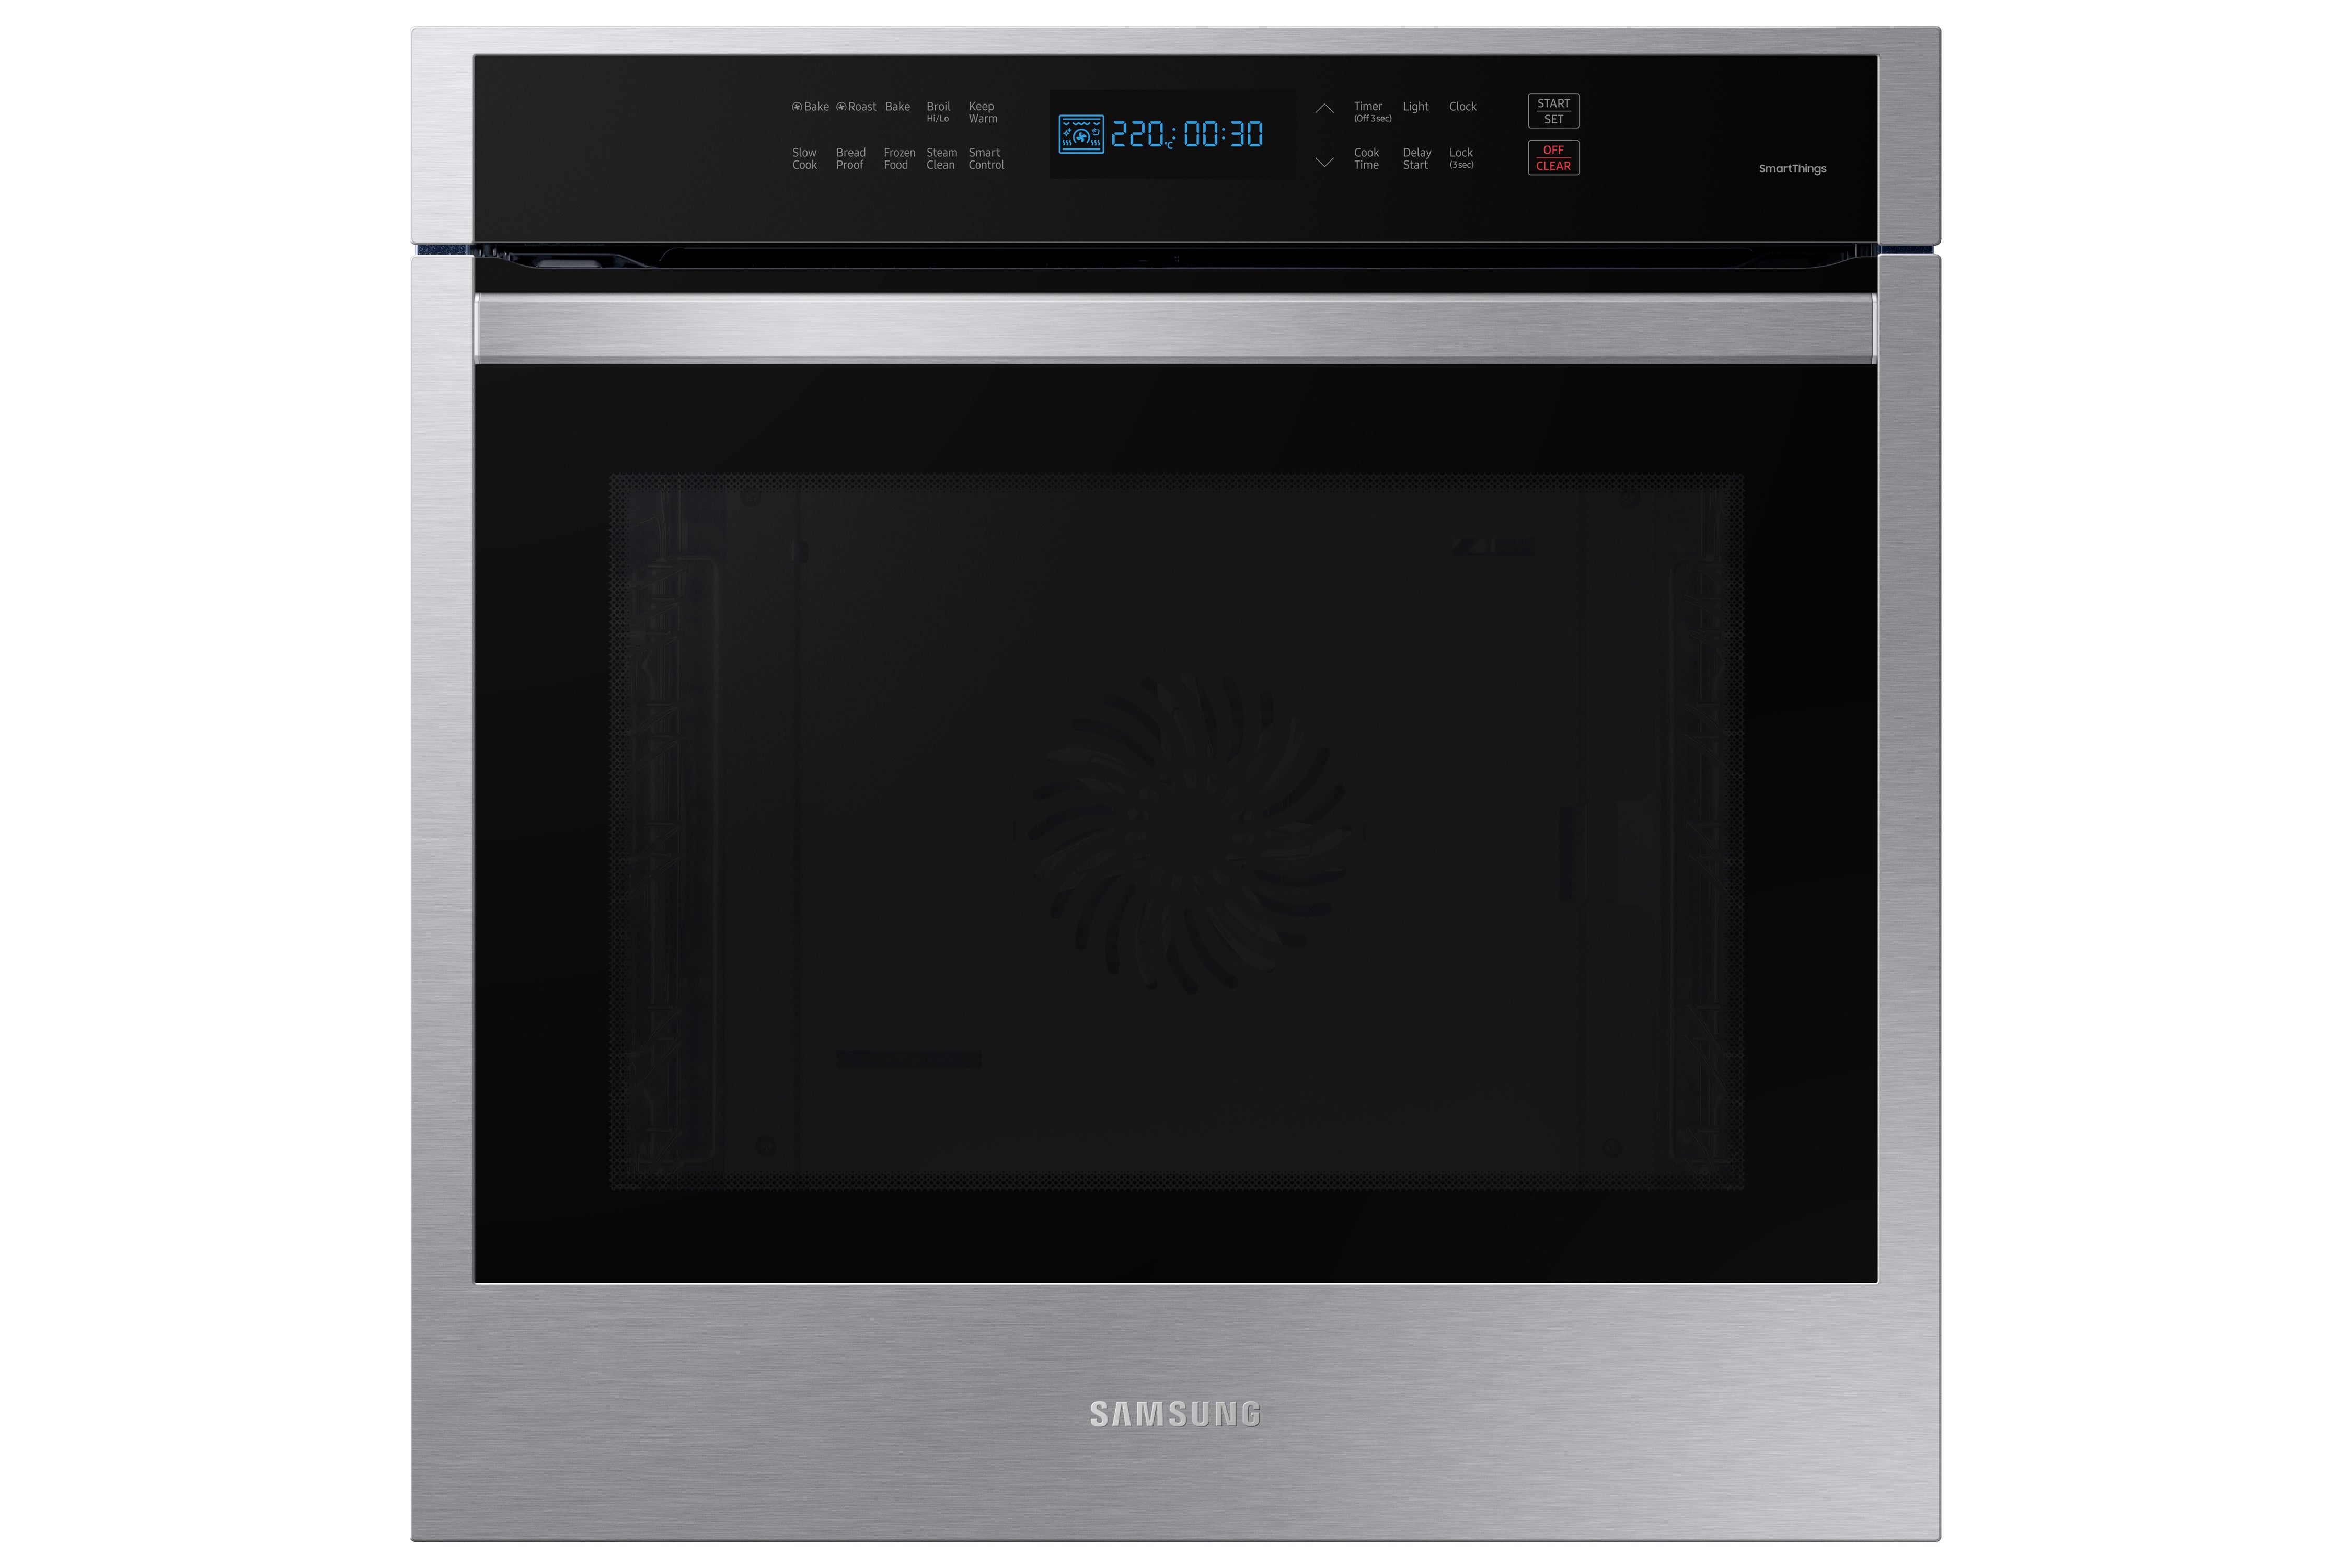 Samsung - 3.1 cu. ft Single Wall Oven in Stainless - NV31T4551SS